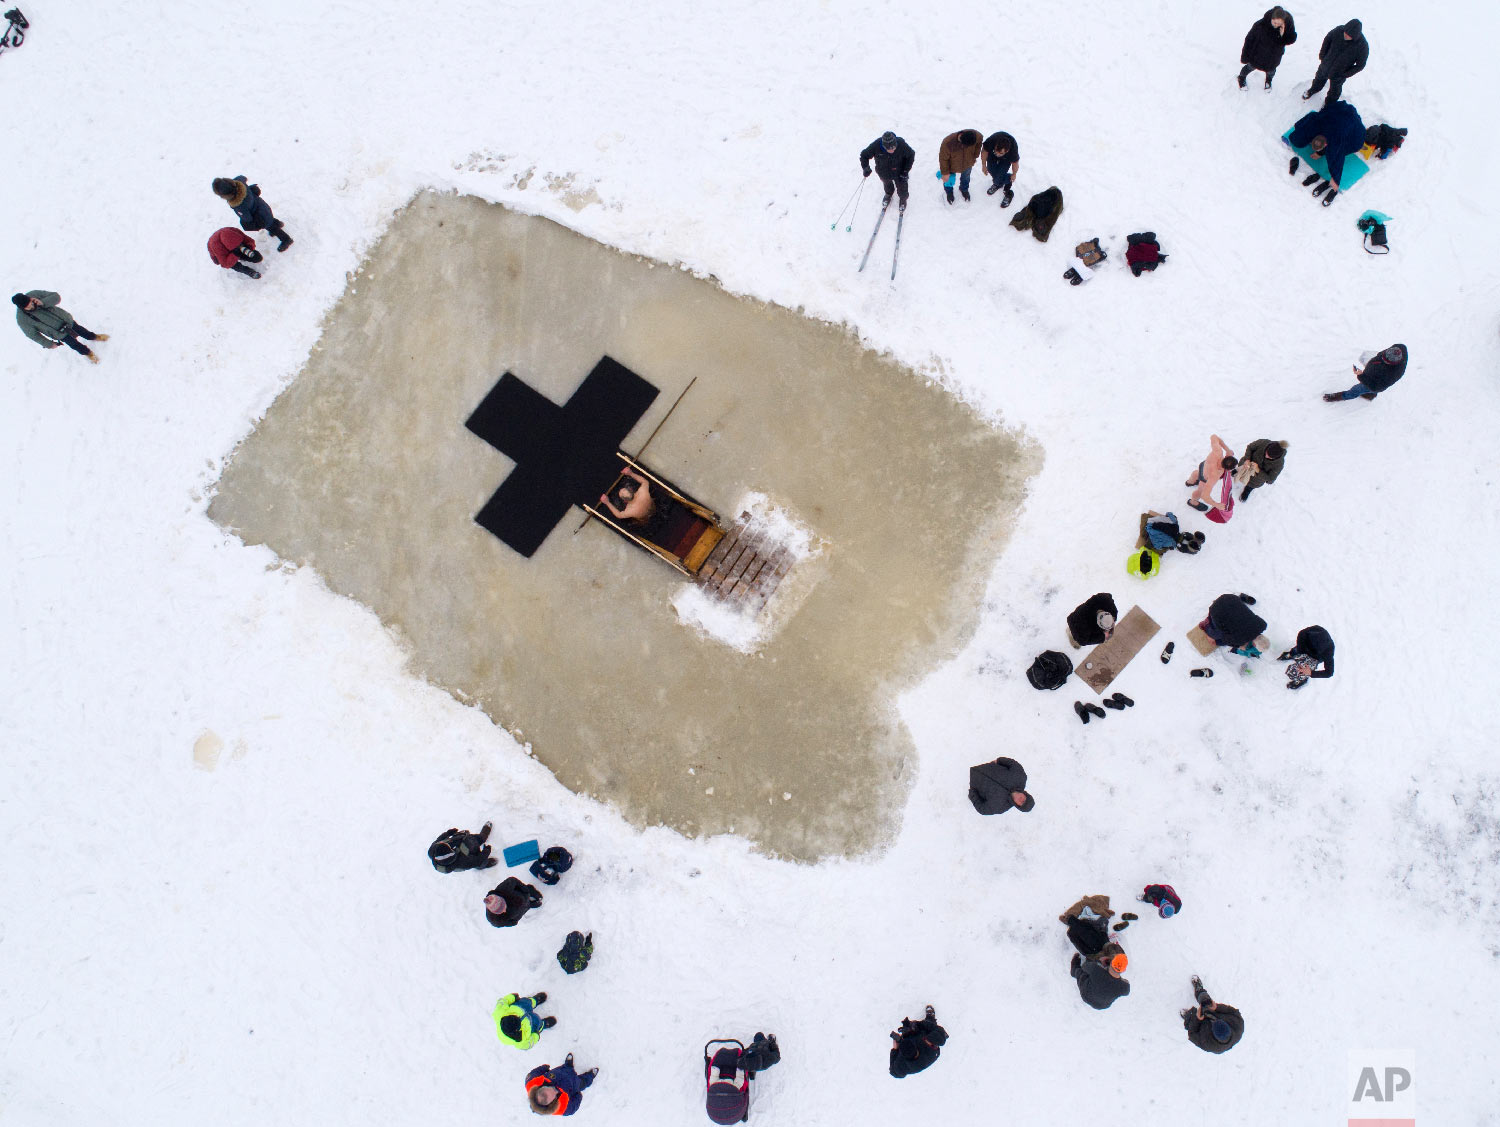  Russian Orthodox believers gather to swim in the icy water on Epiphany at a hole in the form of Orthodox Cross at a lake in Orlino village, 70 kilometers (43 miles) south of St.Petersburg, Russia on Jan. 19, 2018. (AP Photo/Dmitri Lovetsky) 